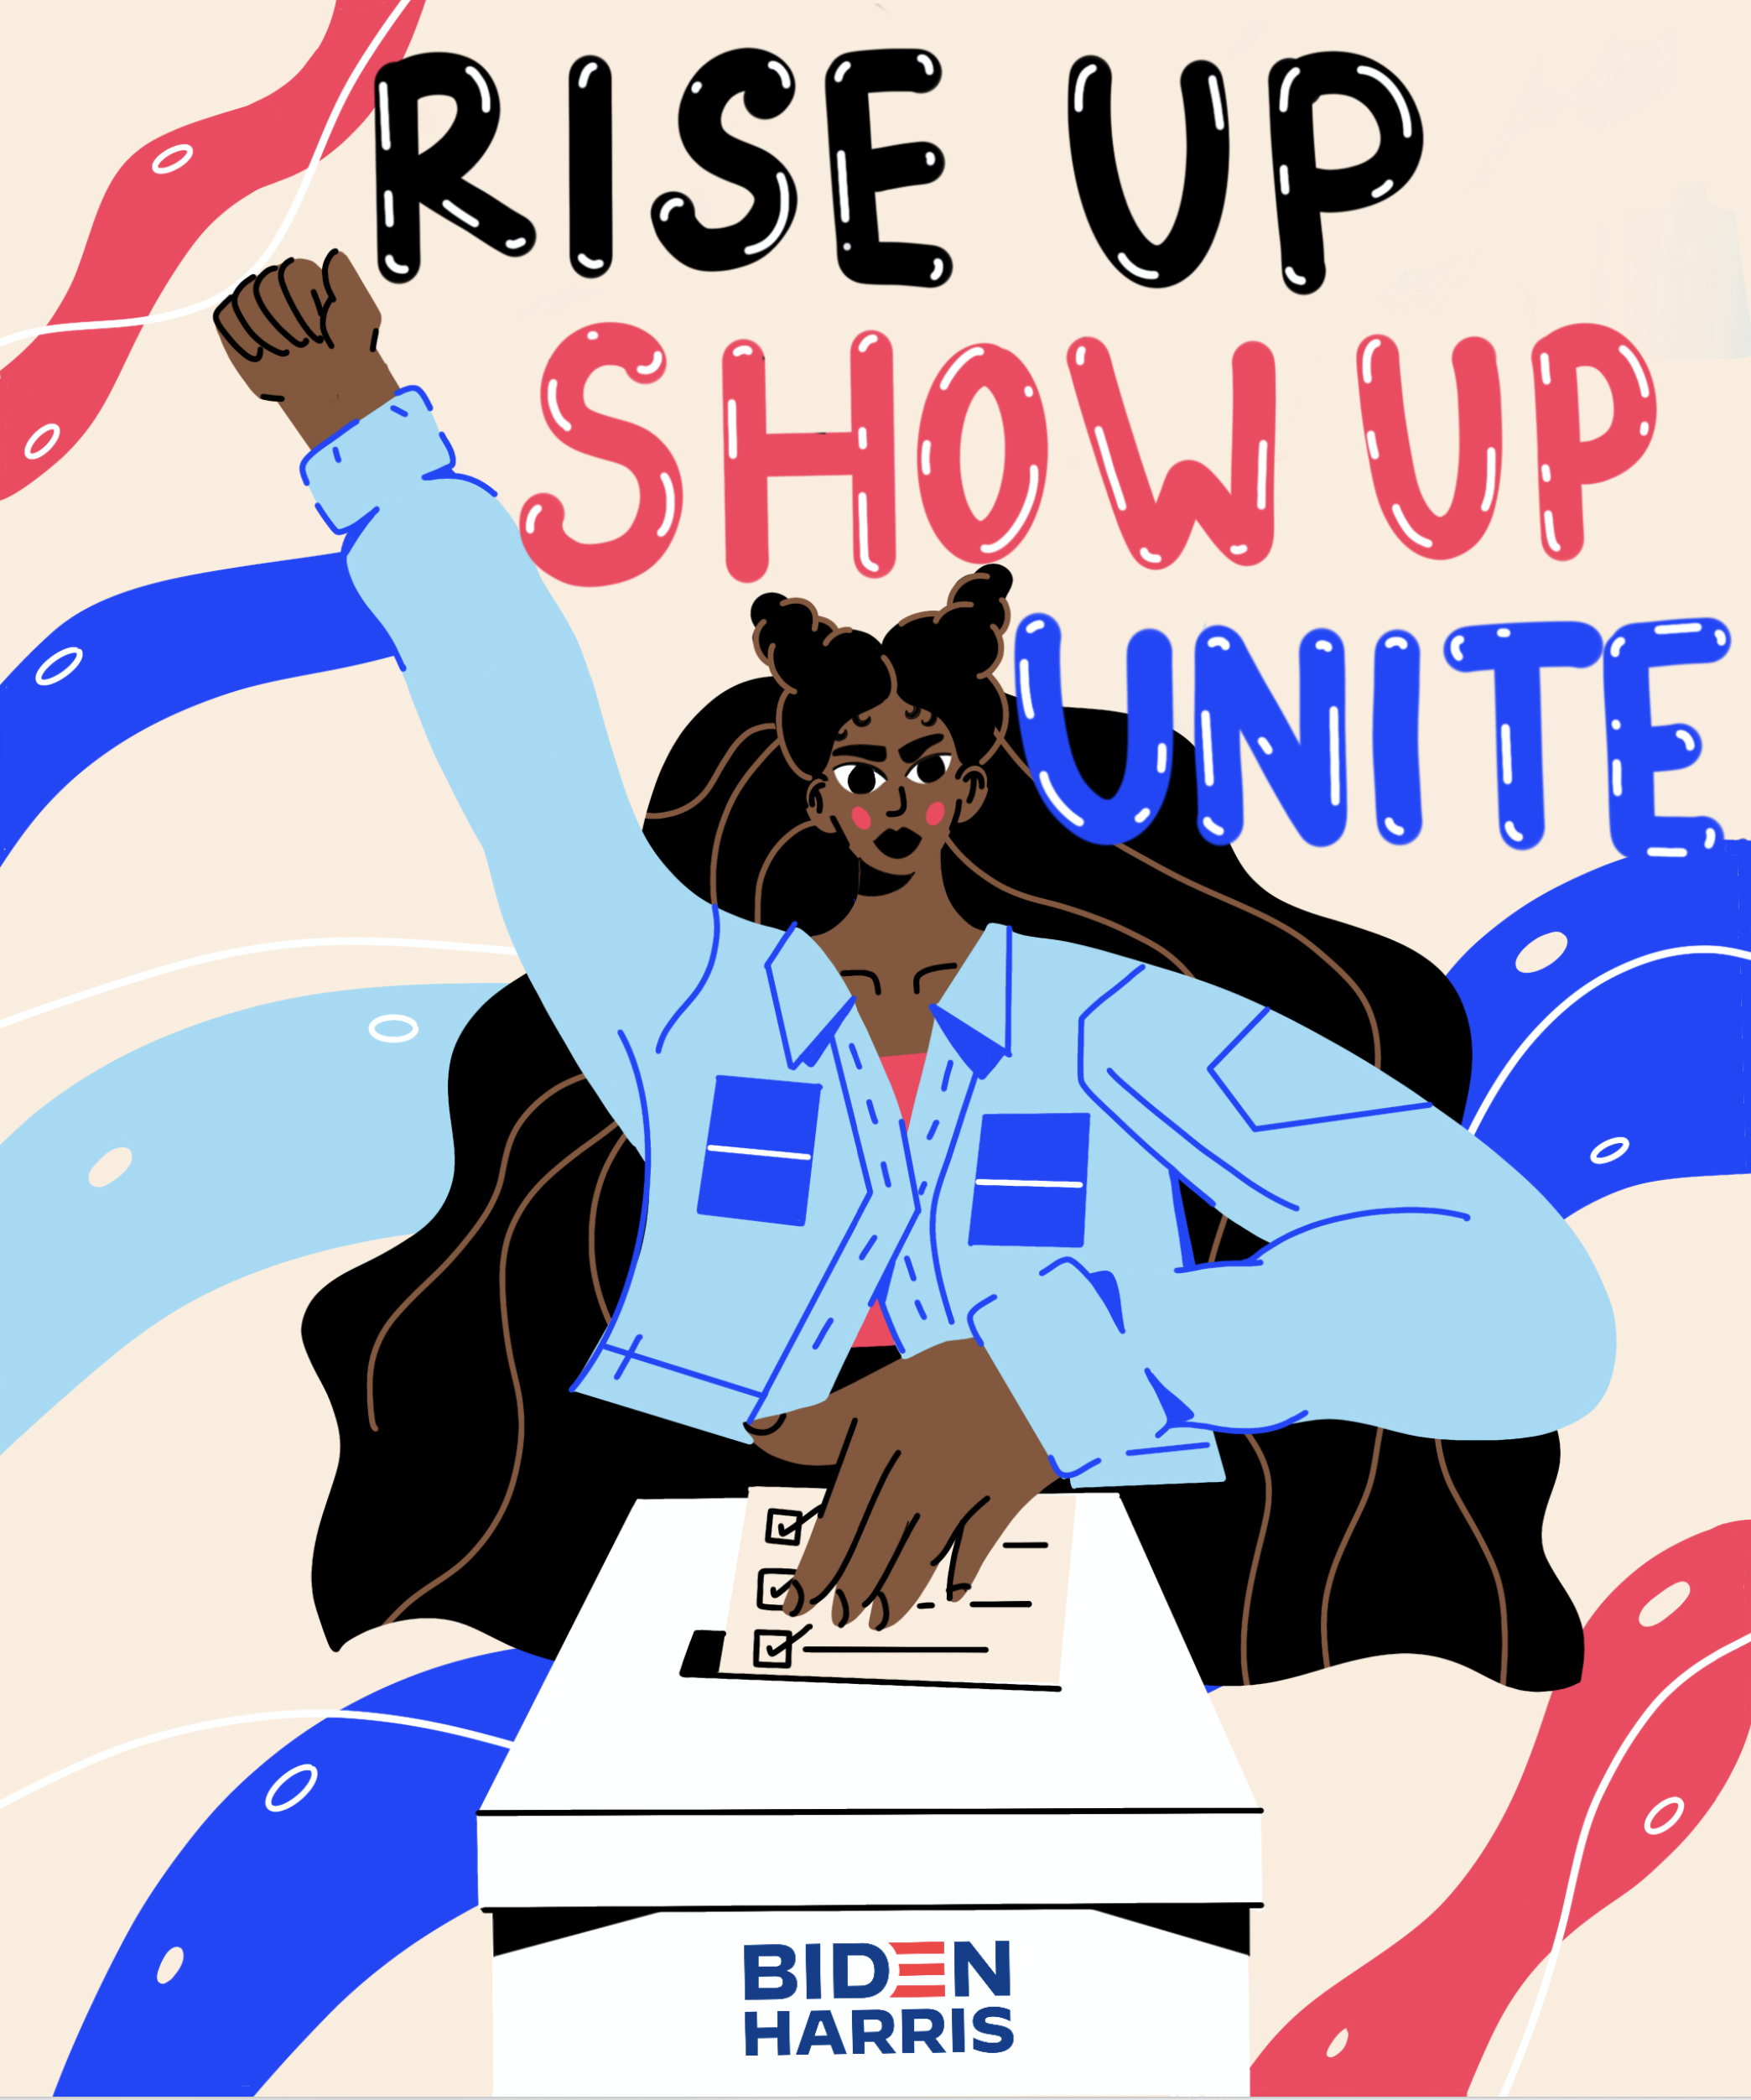 Lettering art of the phrase 'Rise up. Show up. Unite!' by Maya Ealey